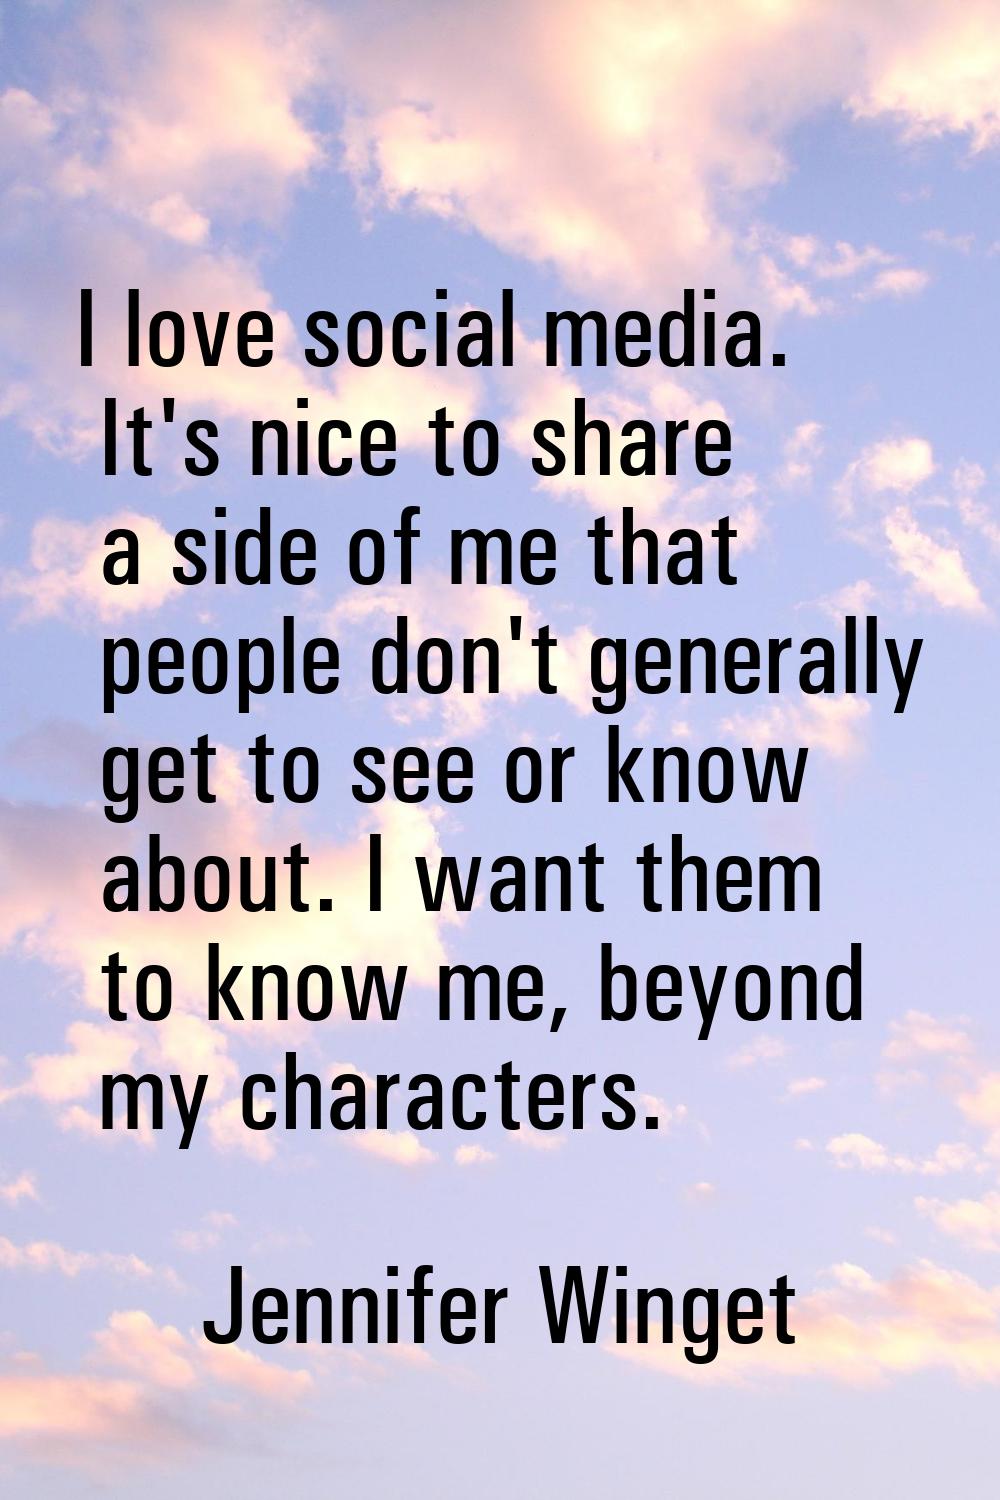 I love social media. It's nice to share a side of me that people don't generally get to see or know